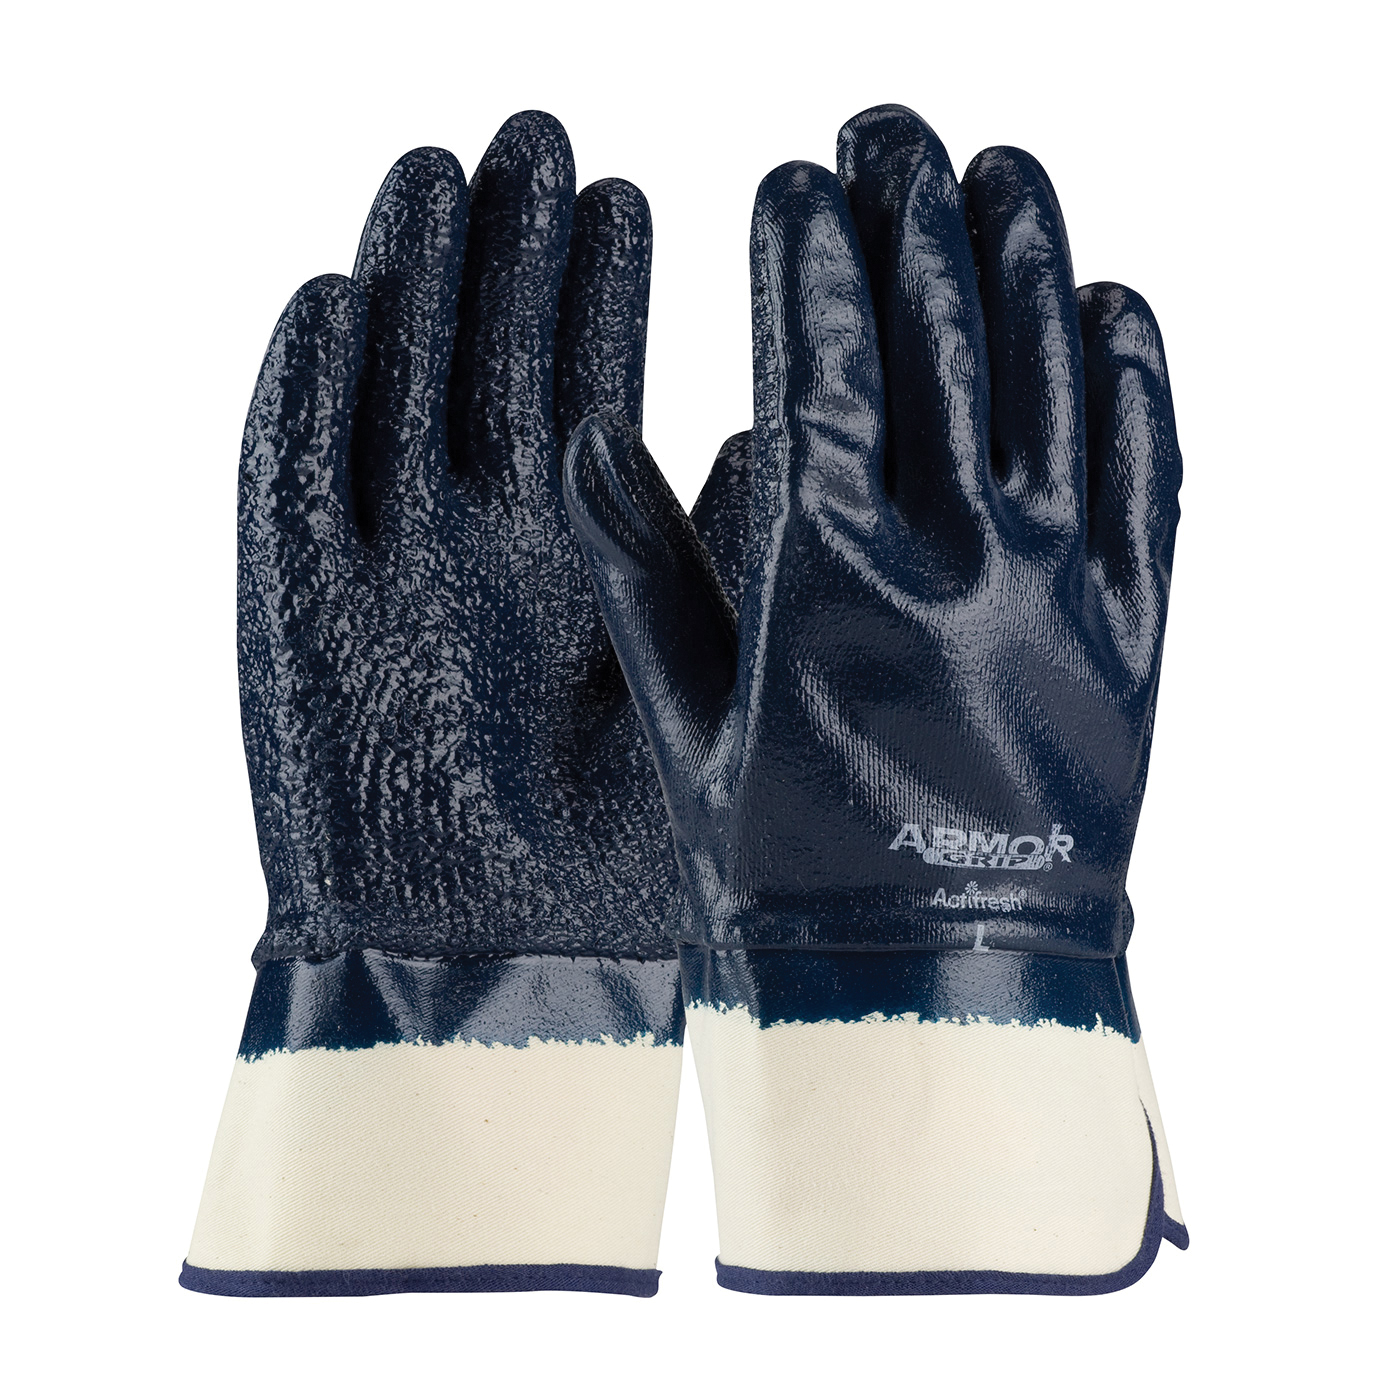 PIP® ArmorGrip® 56-3147/L Dipped Fully Coated Gloves, L, Cotton/Nitrile, Blue, Terry Cloth Lining, 10.8 in L, Resists: Abrasion and Cut, Supported Support, Plasticized Safety Cuff, 3 mm THK